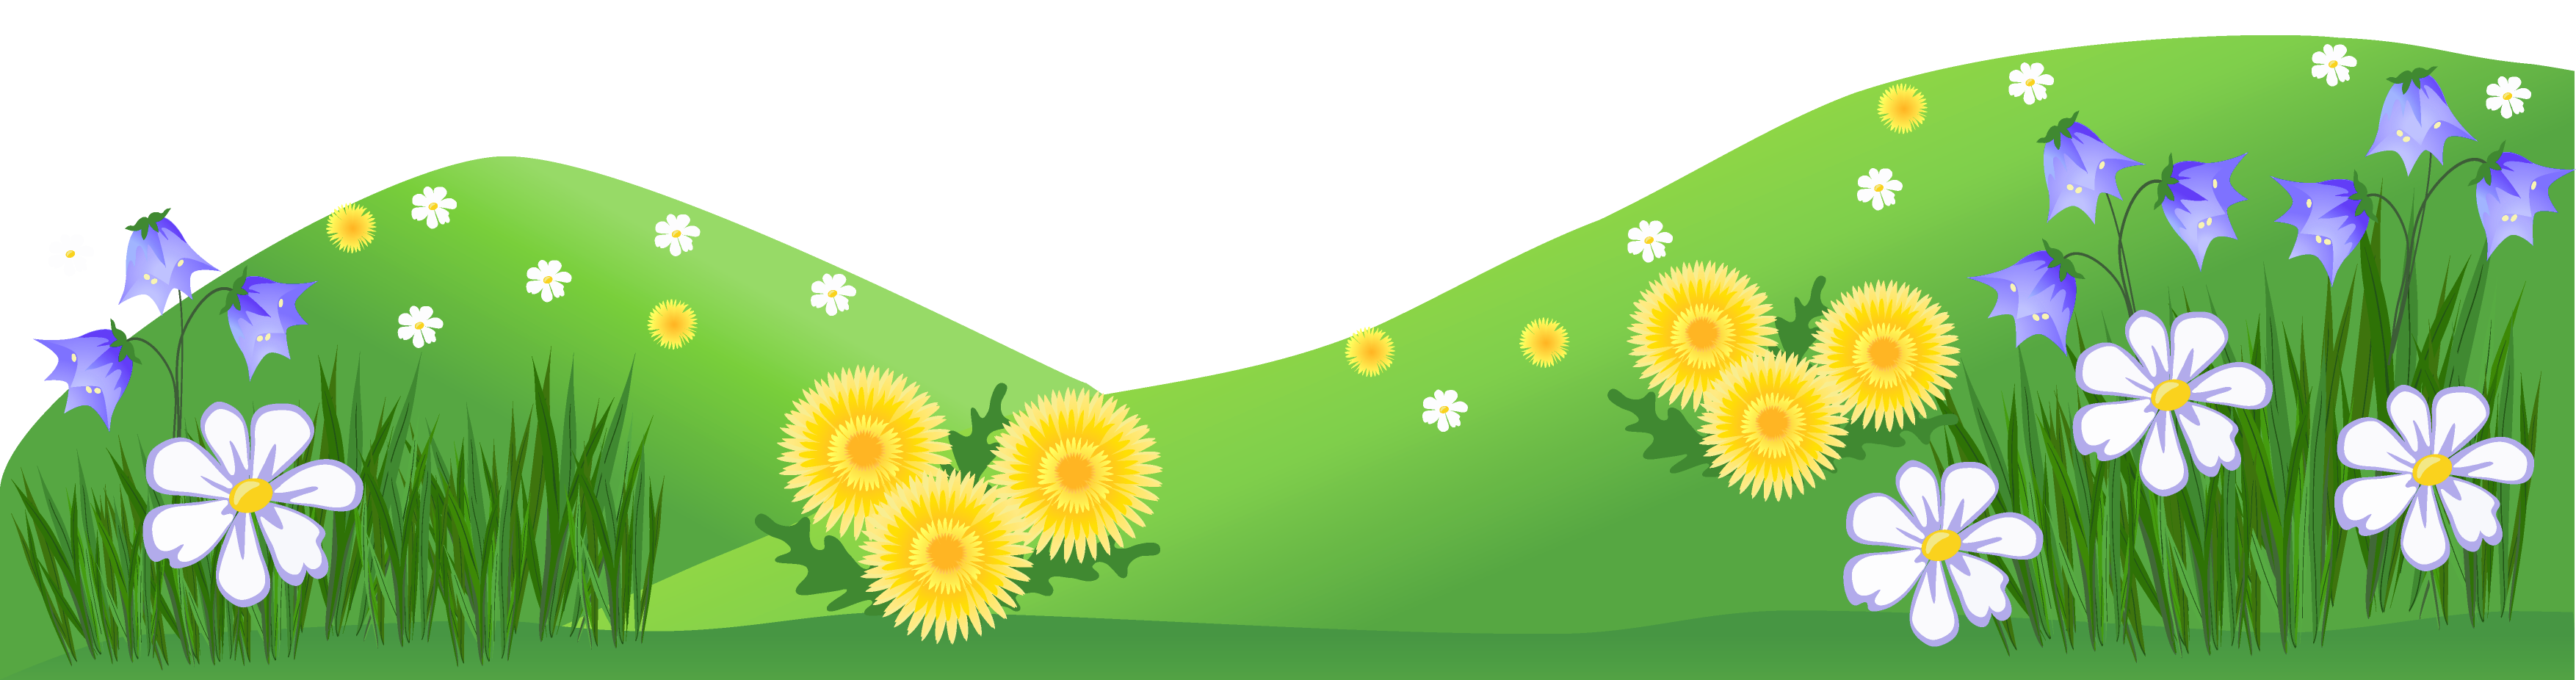 Grass Ground with Flowers Clipart